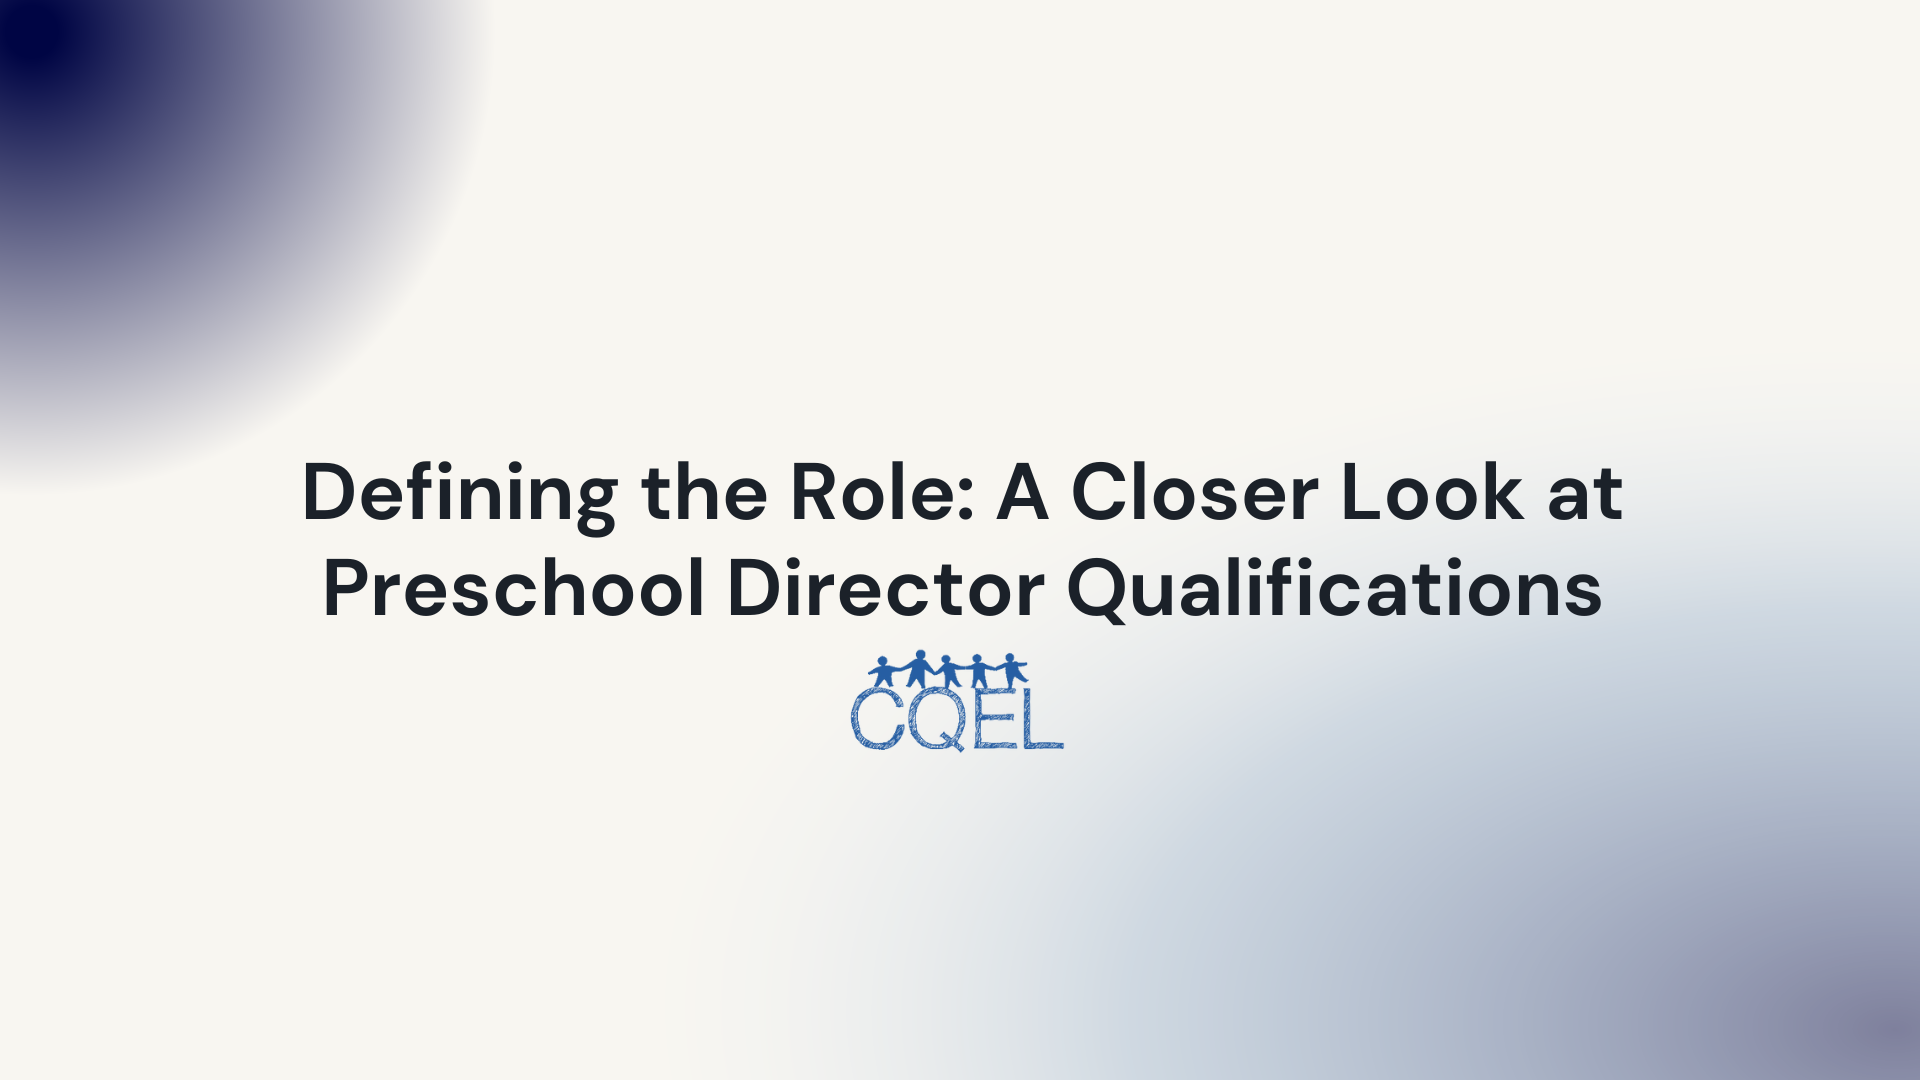 Defining the Role: A Closer Look at Preschool Director Qualifications in California